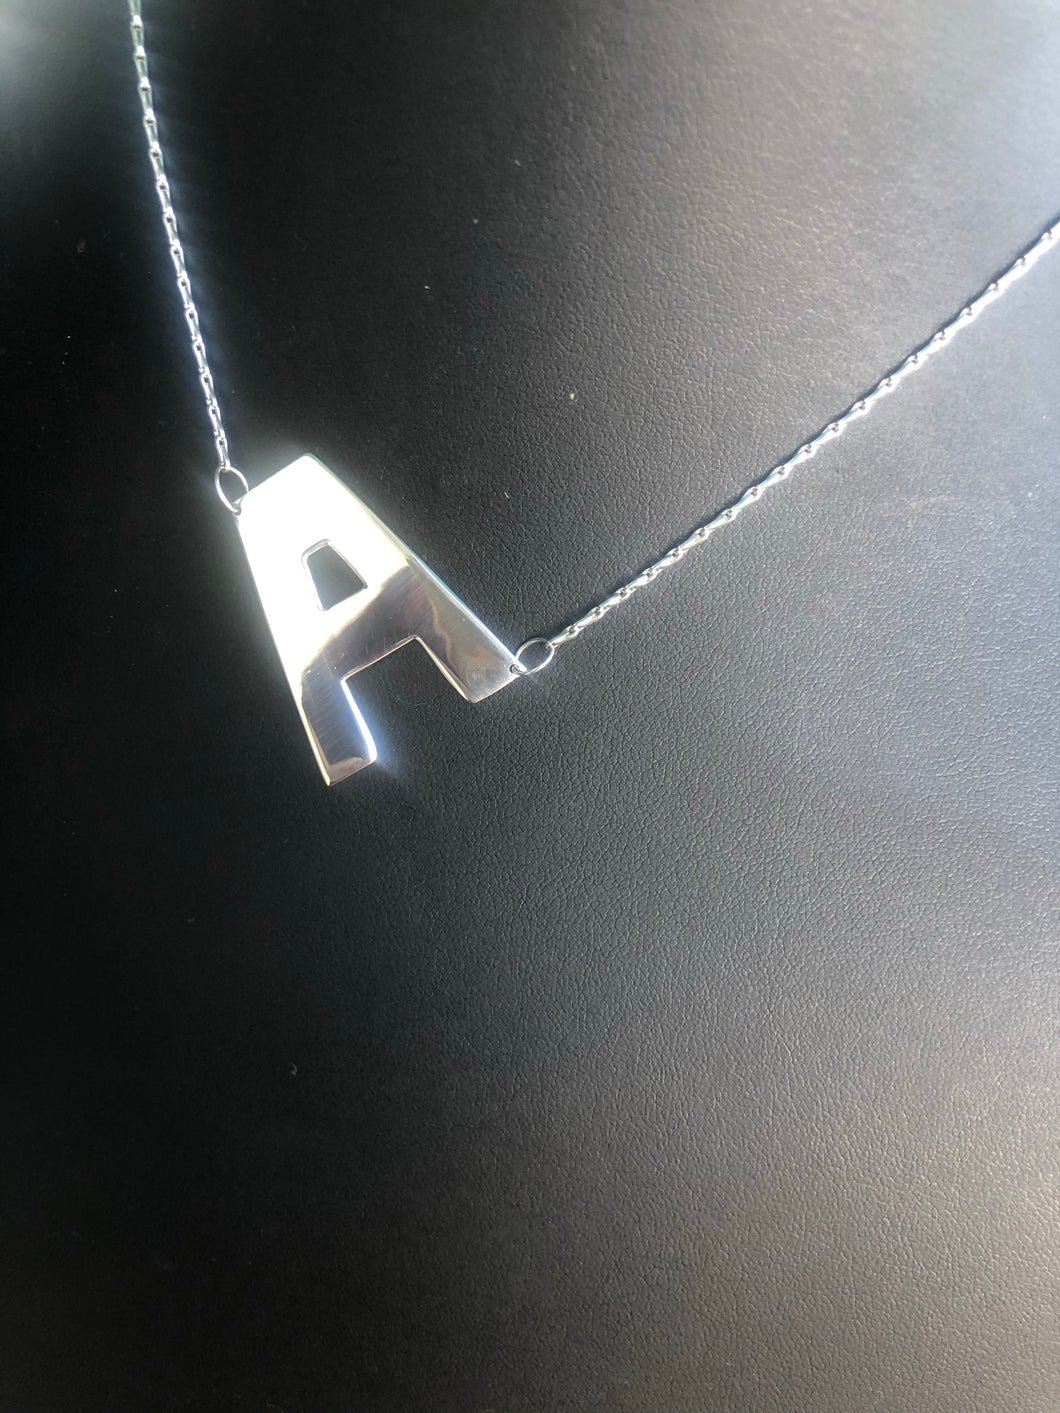 INITIAL necklace!